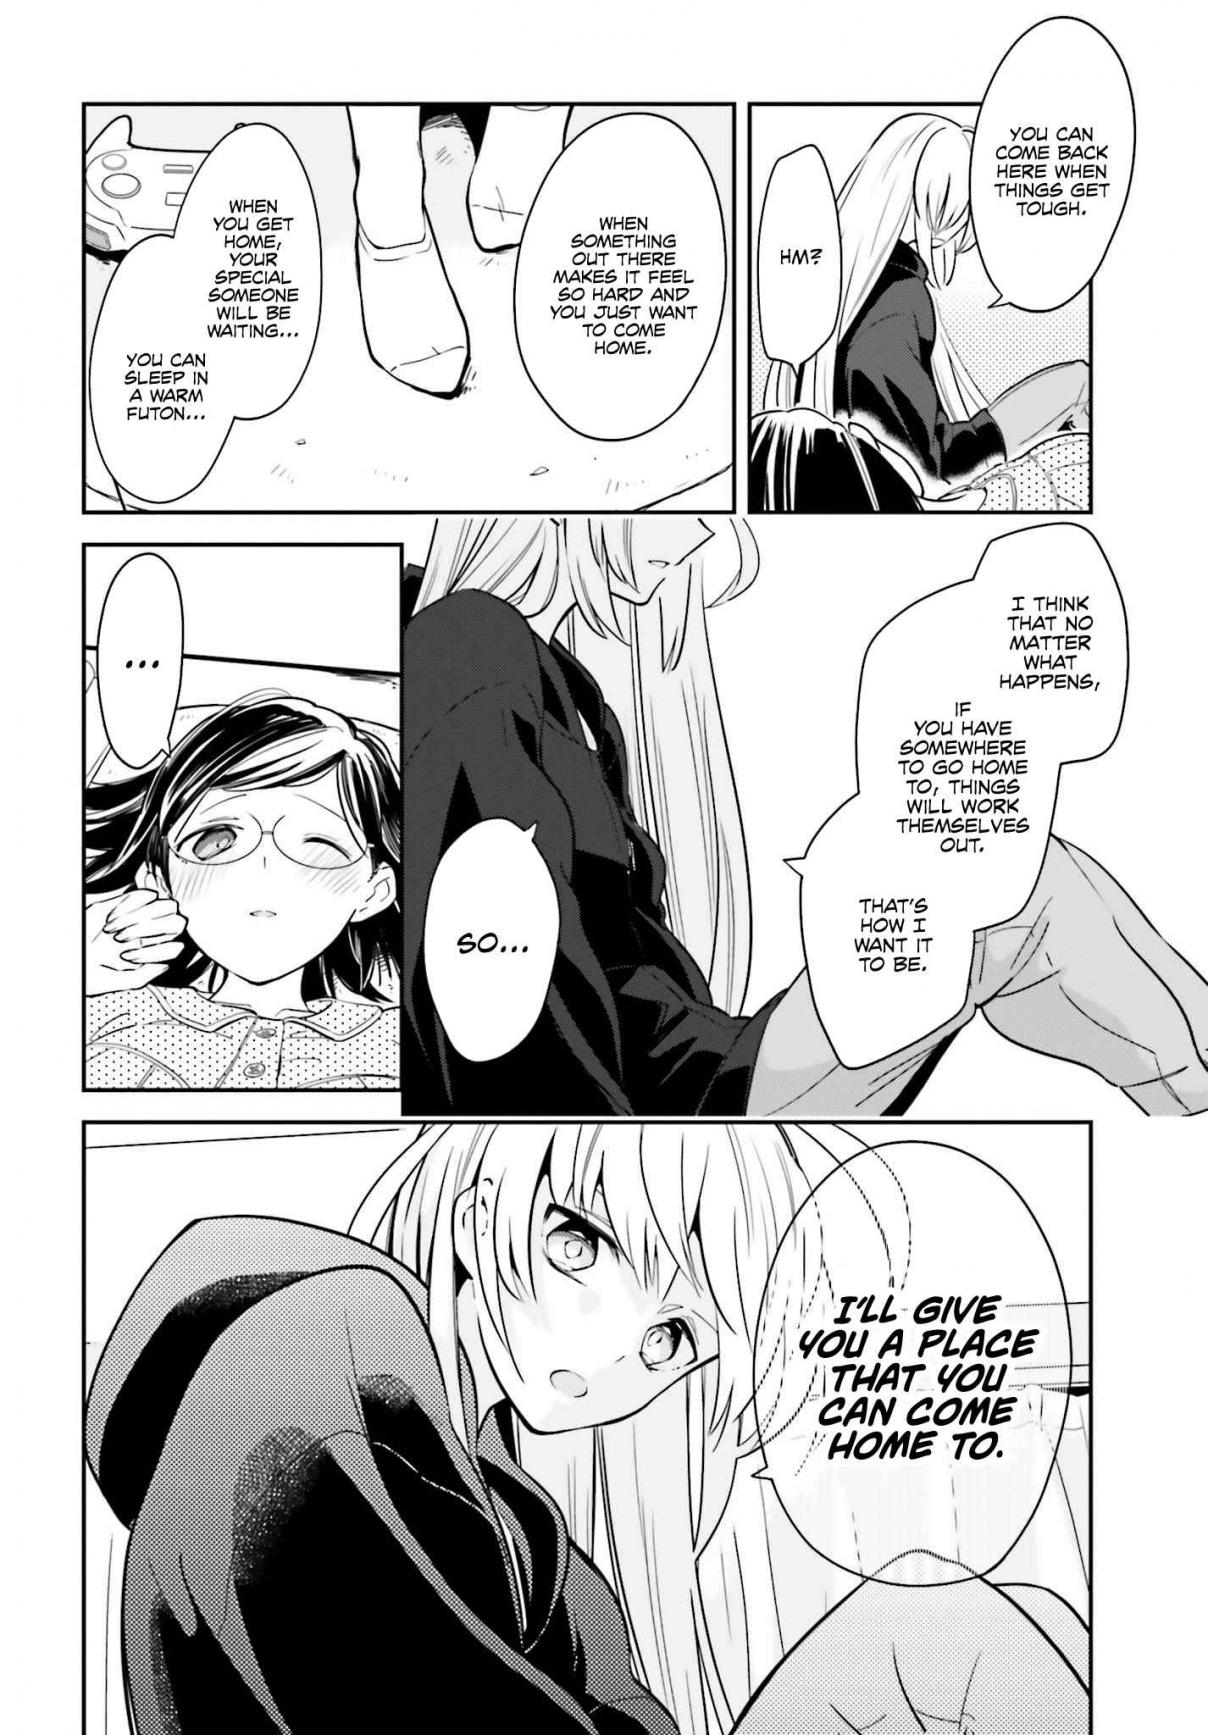 Even if it was just once, I regret it Vol. 1 Ch. 1 Are you regretting it?